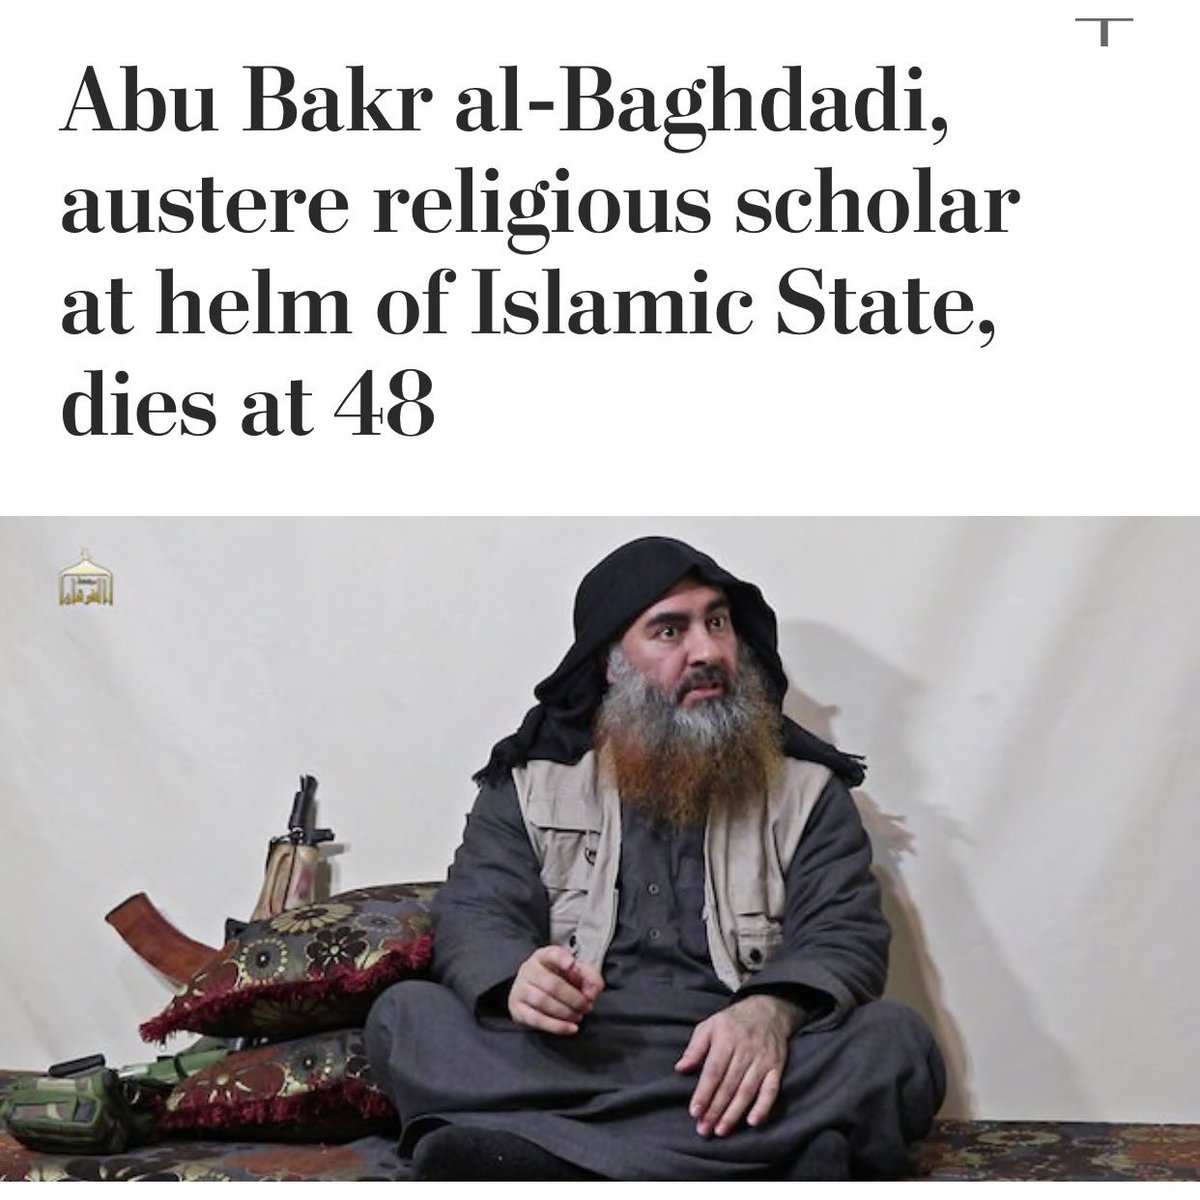  Epilog. Today American forces killed ISIS leader al-Baghdadi, who the Pulse shooter swore allegience to. Media is now recasting al-Baghdadi as a sympathetic figure.This...from “Islamic State’s terrorist-in-Chief” to “austere religious scholar at helm of Islamic State.